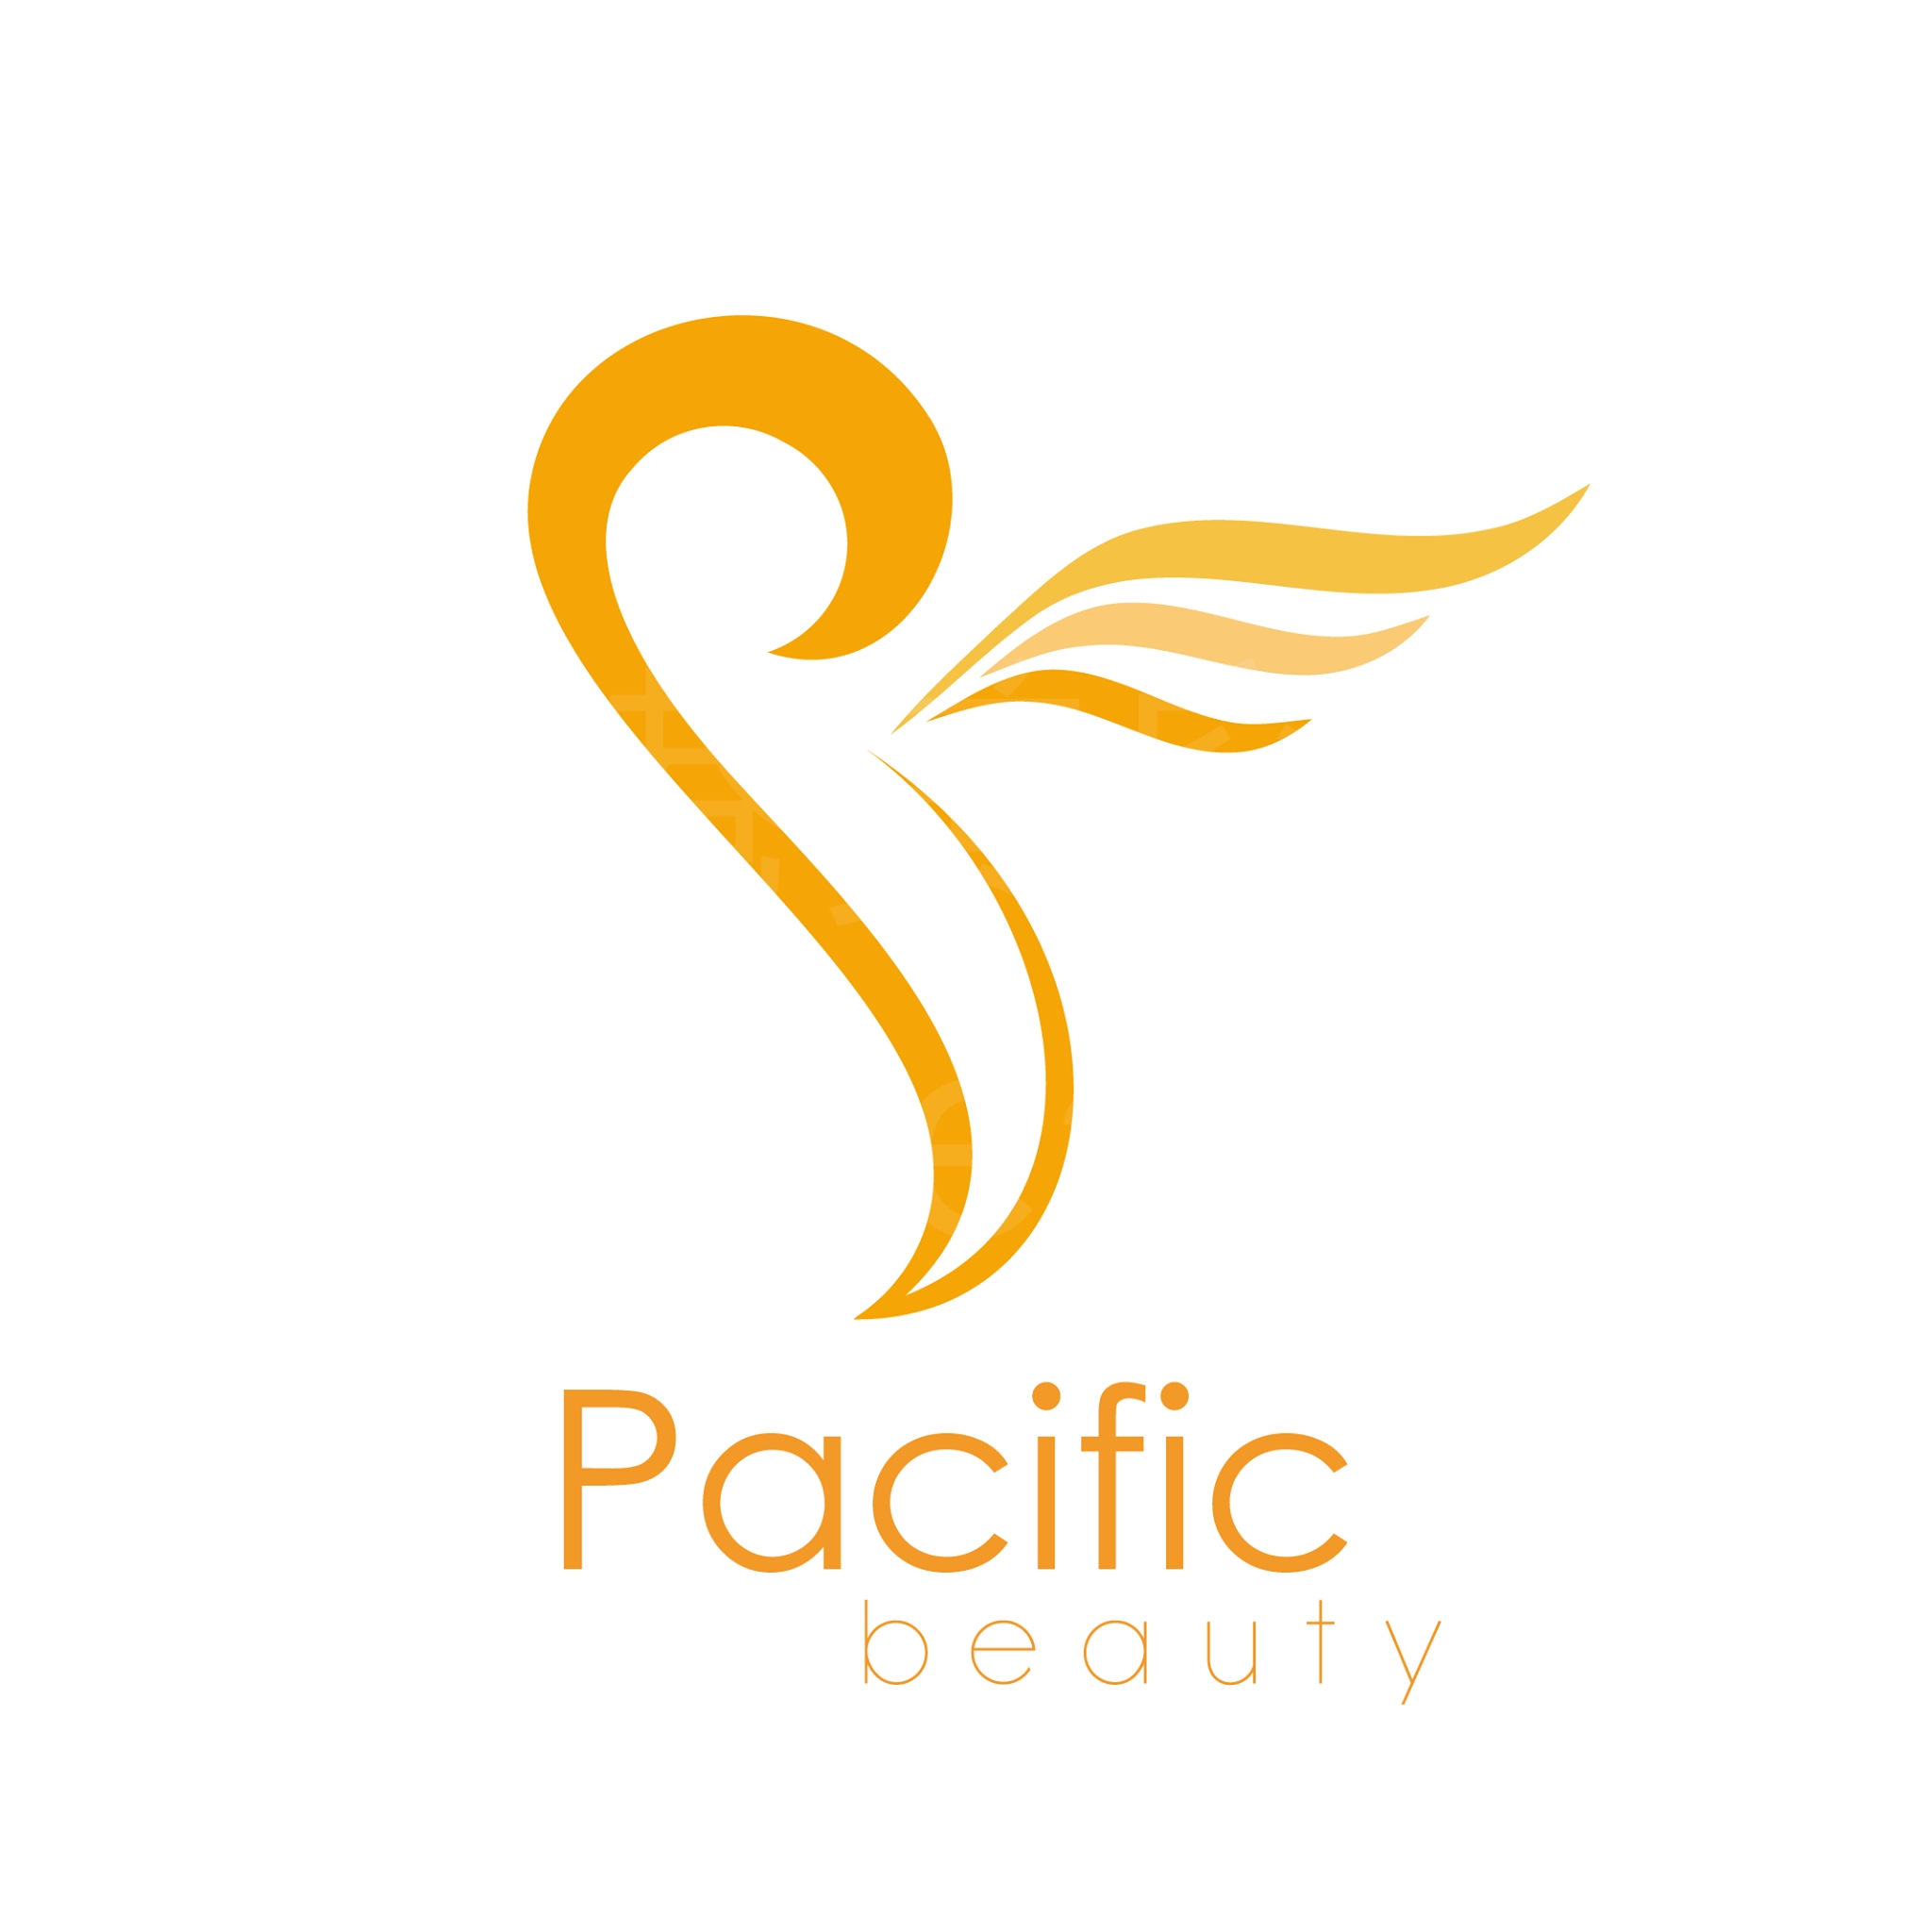 Facial Care: Pacific Beauty